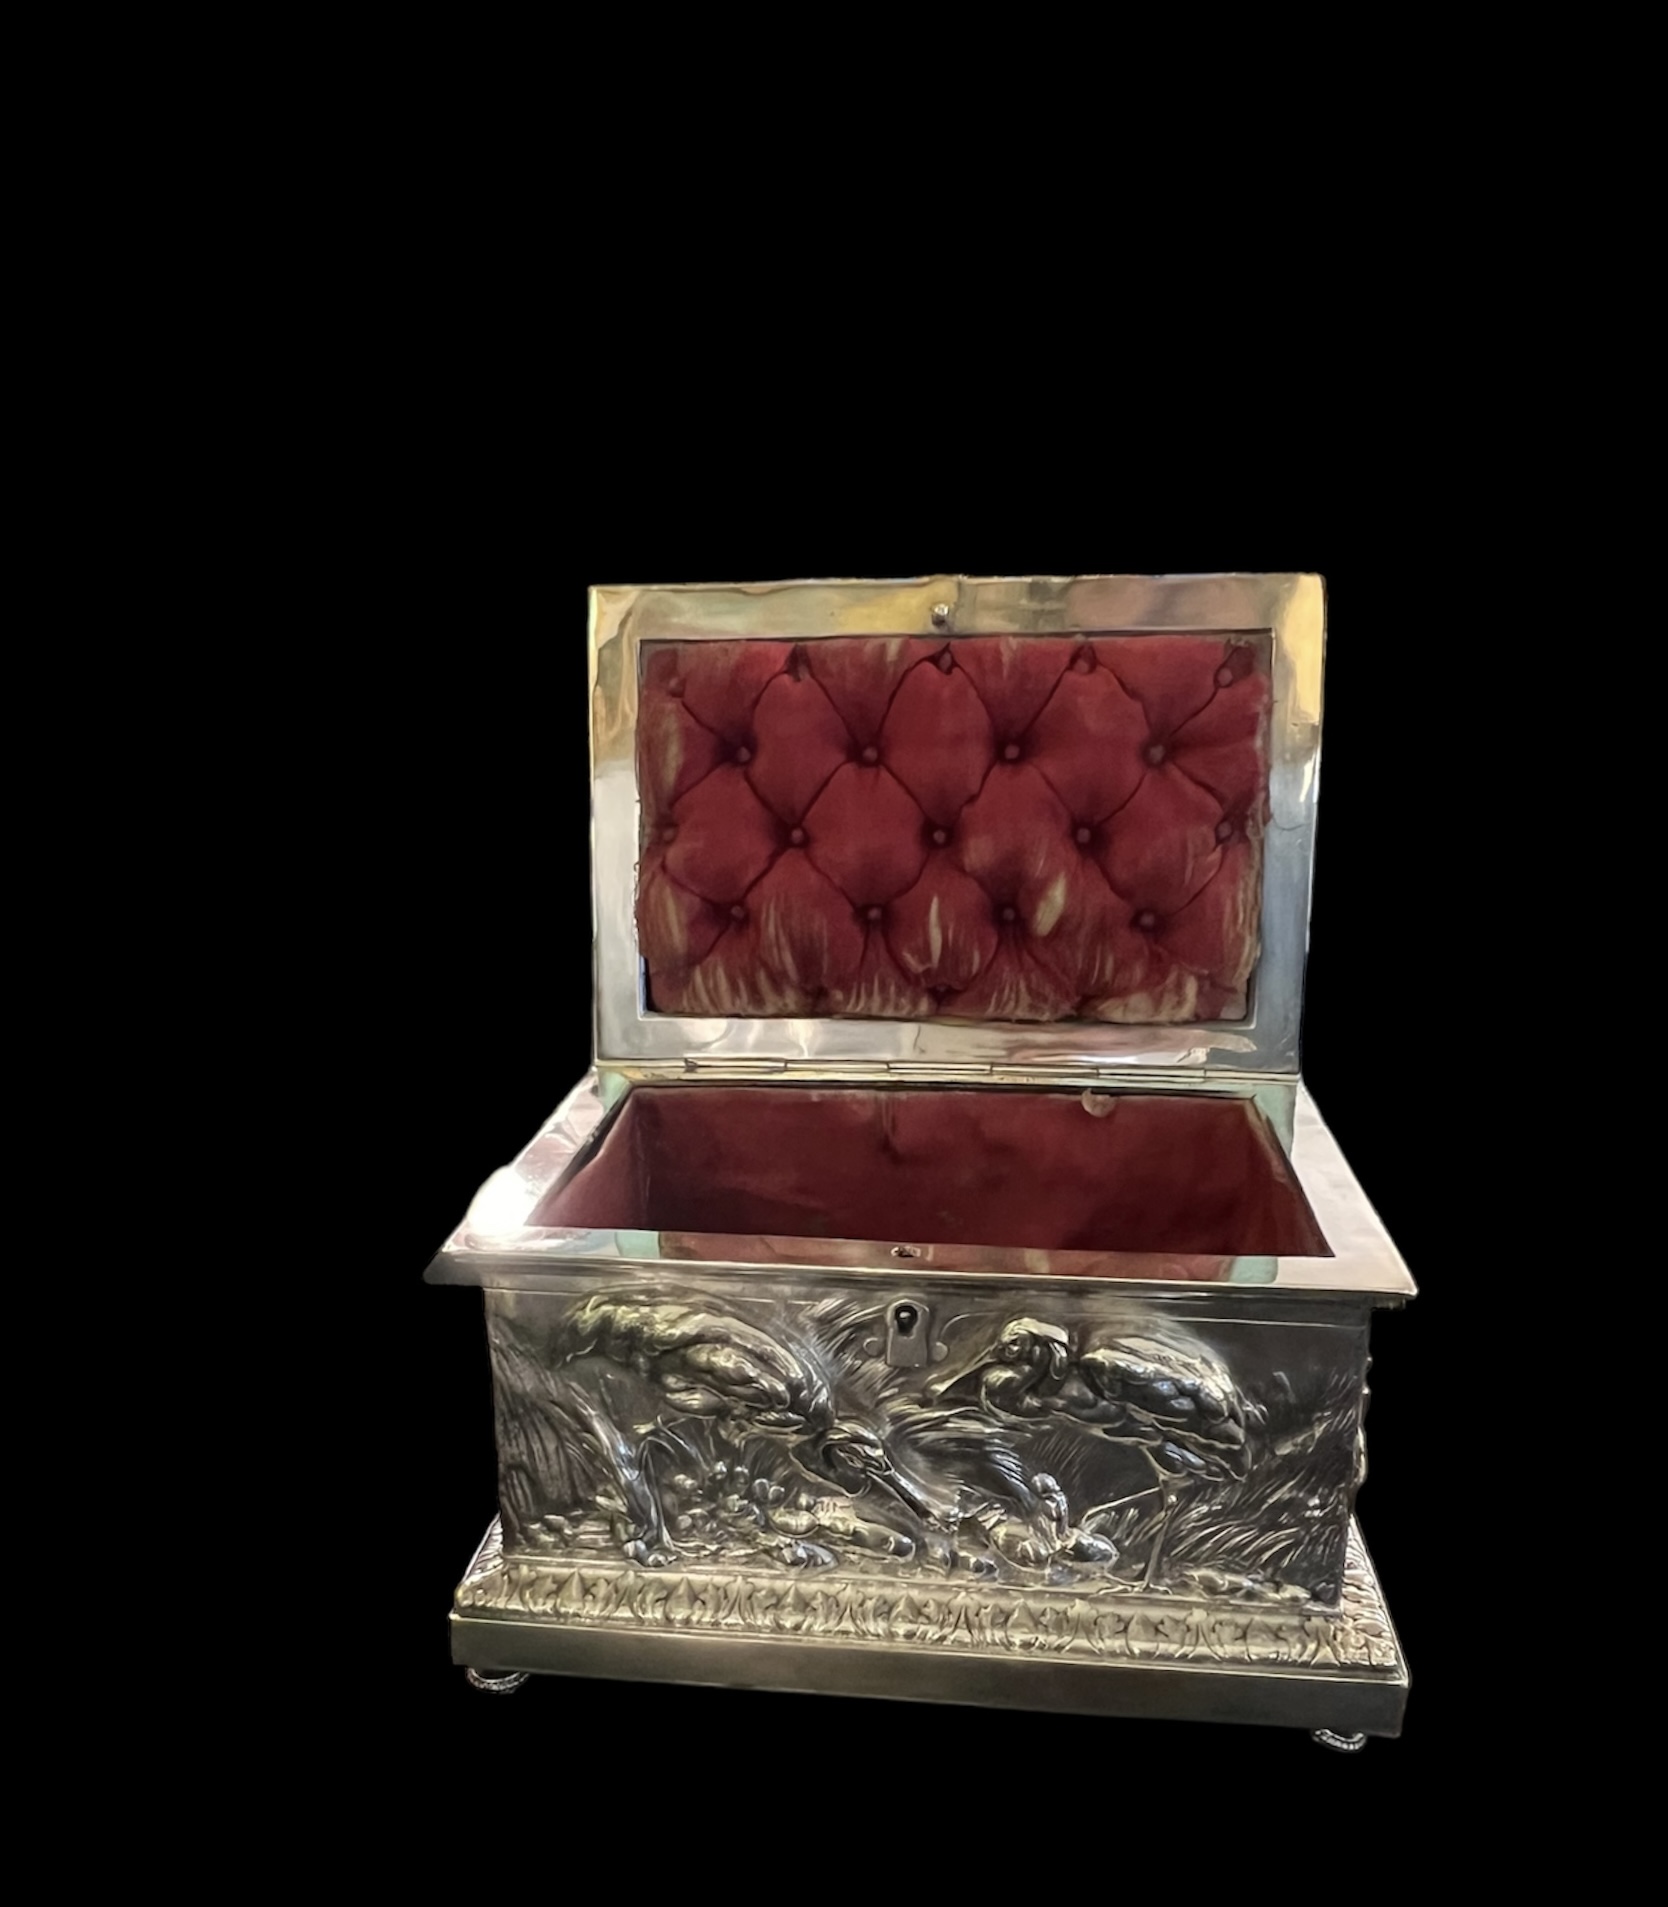 Antique Silver Repousse Jewelry Box